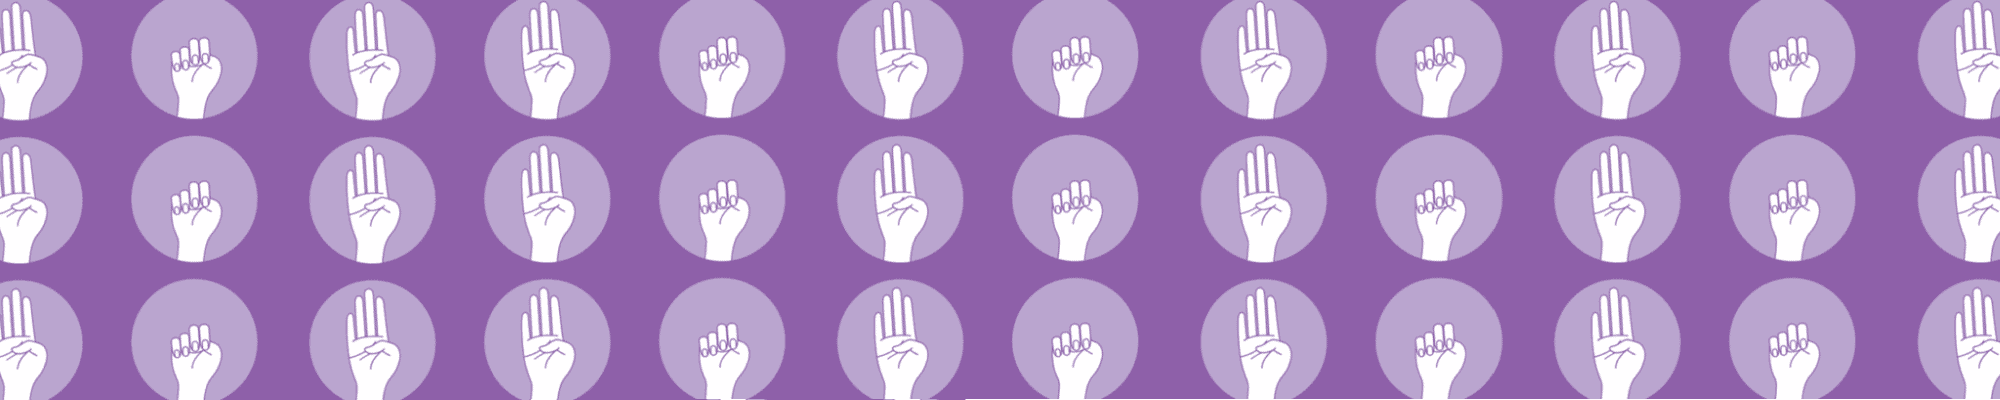 Image showing Signal for Help - palm facing outward, thumb tucked, then wrapped fingers over top of thumb